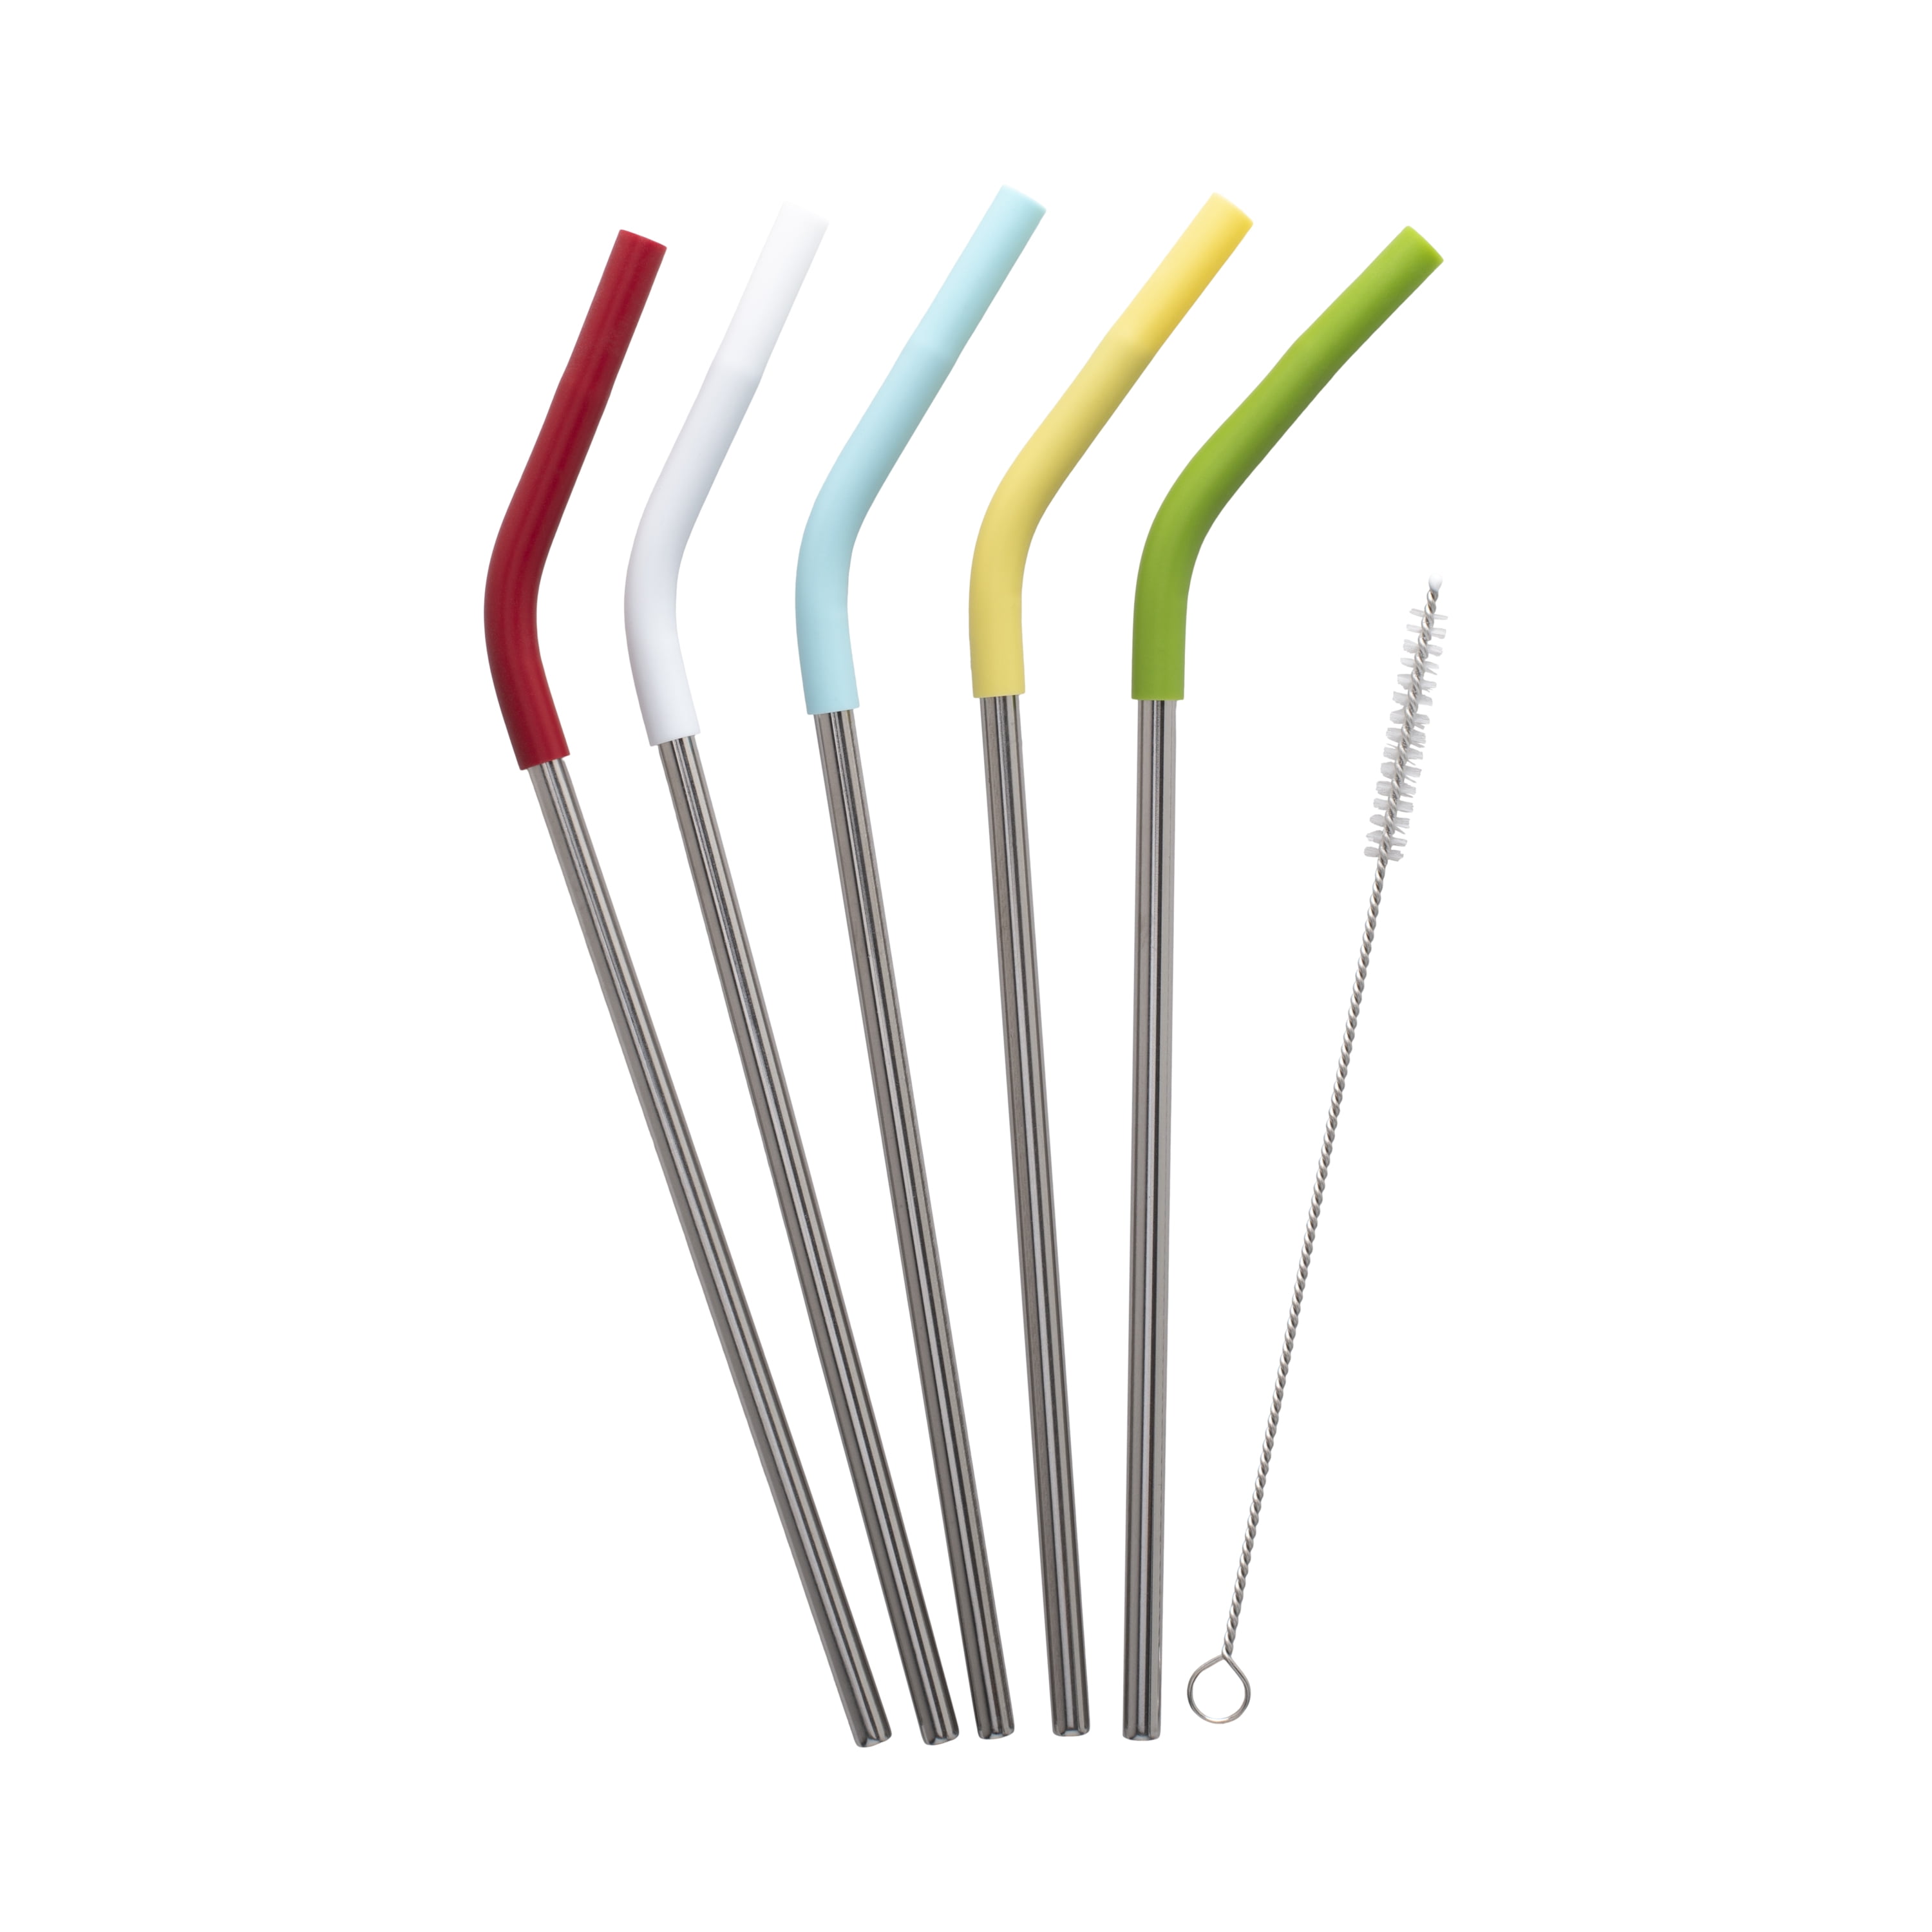 ExcelSteel 020A2 10 PC Reusable Powder Coated Stainless Steel Straws w/ Cleaning Brushes